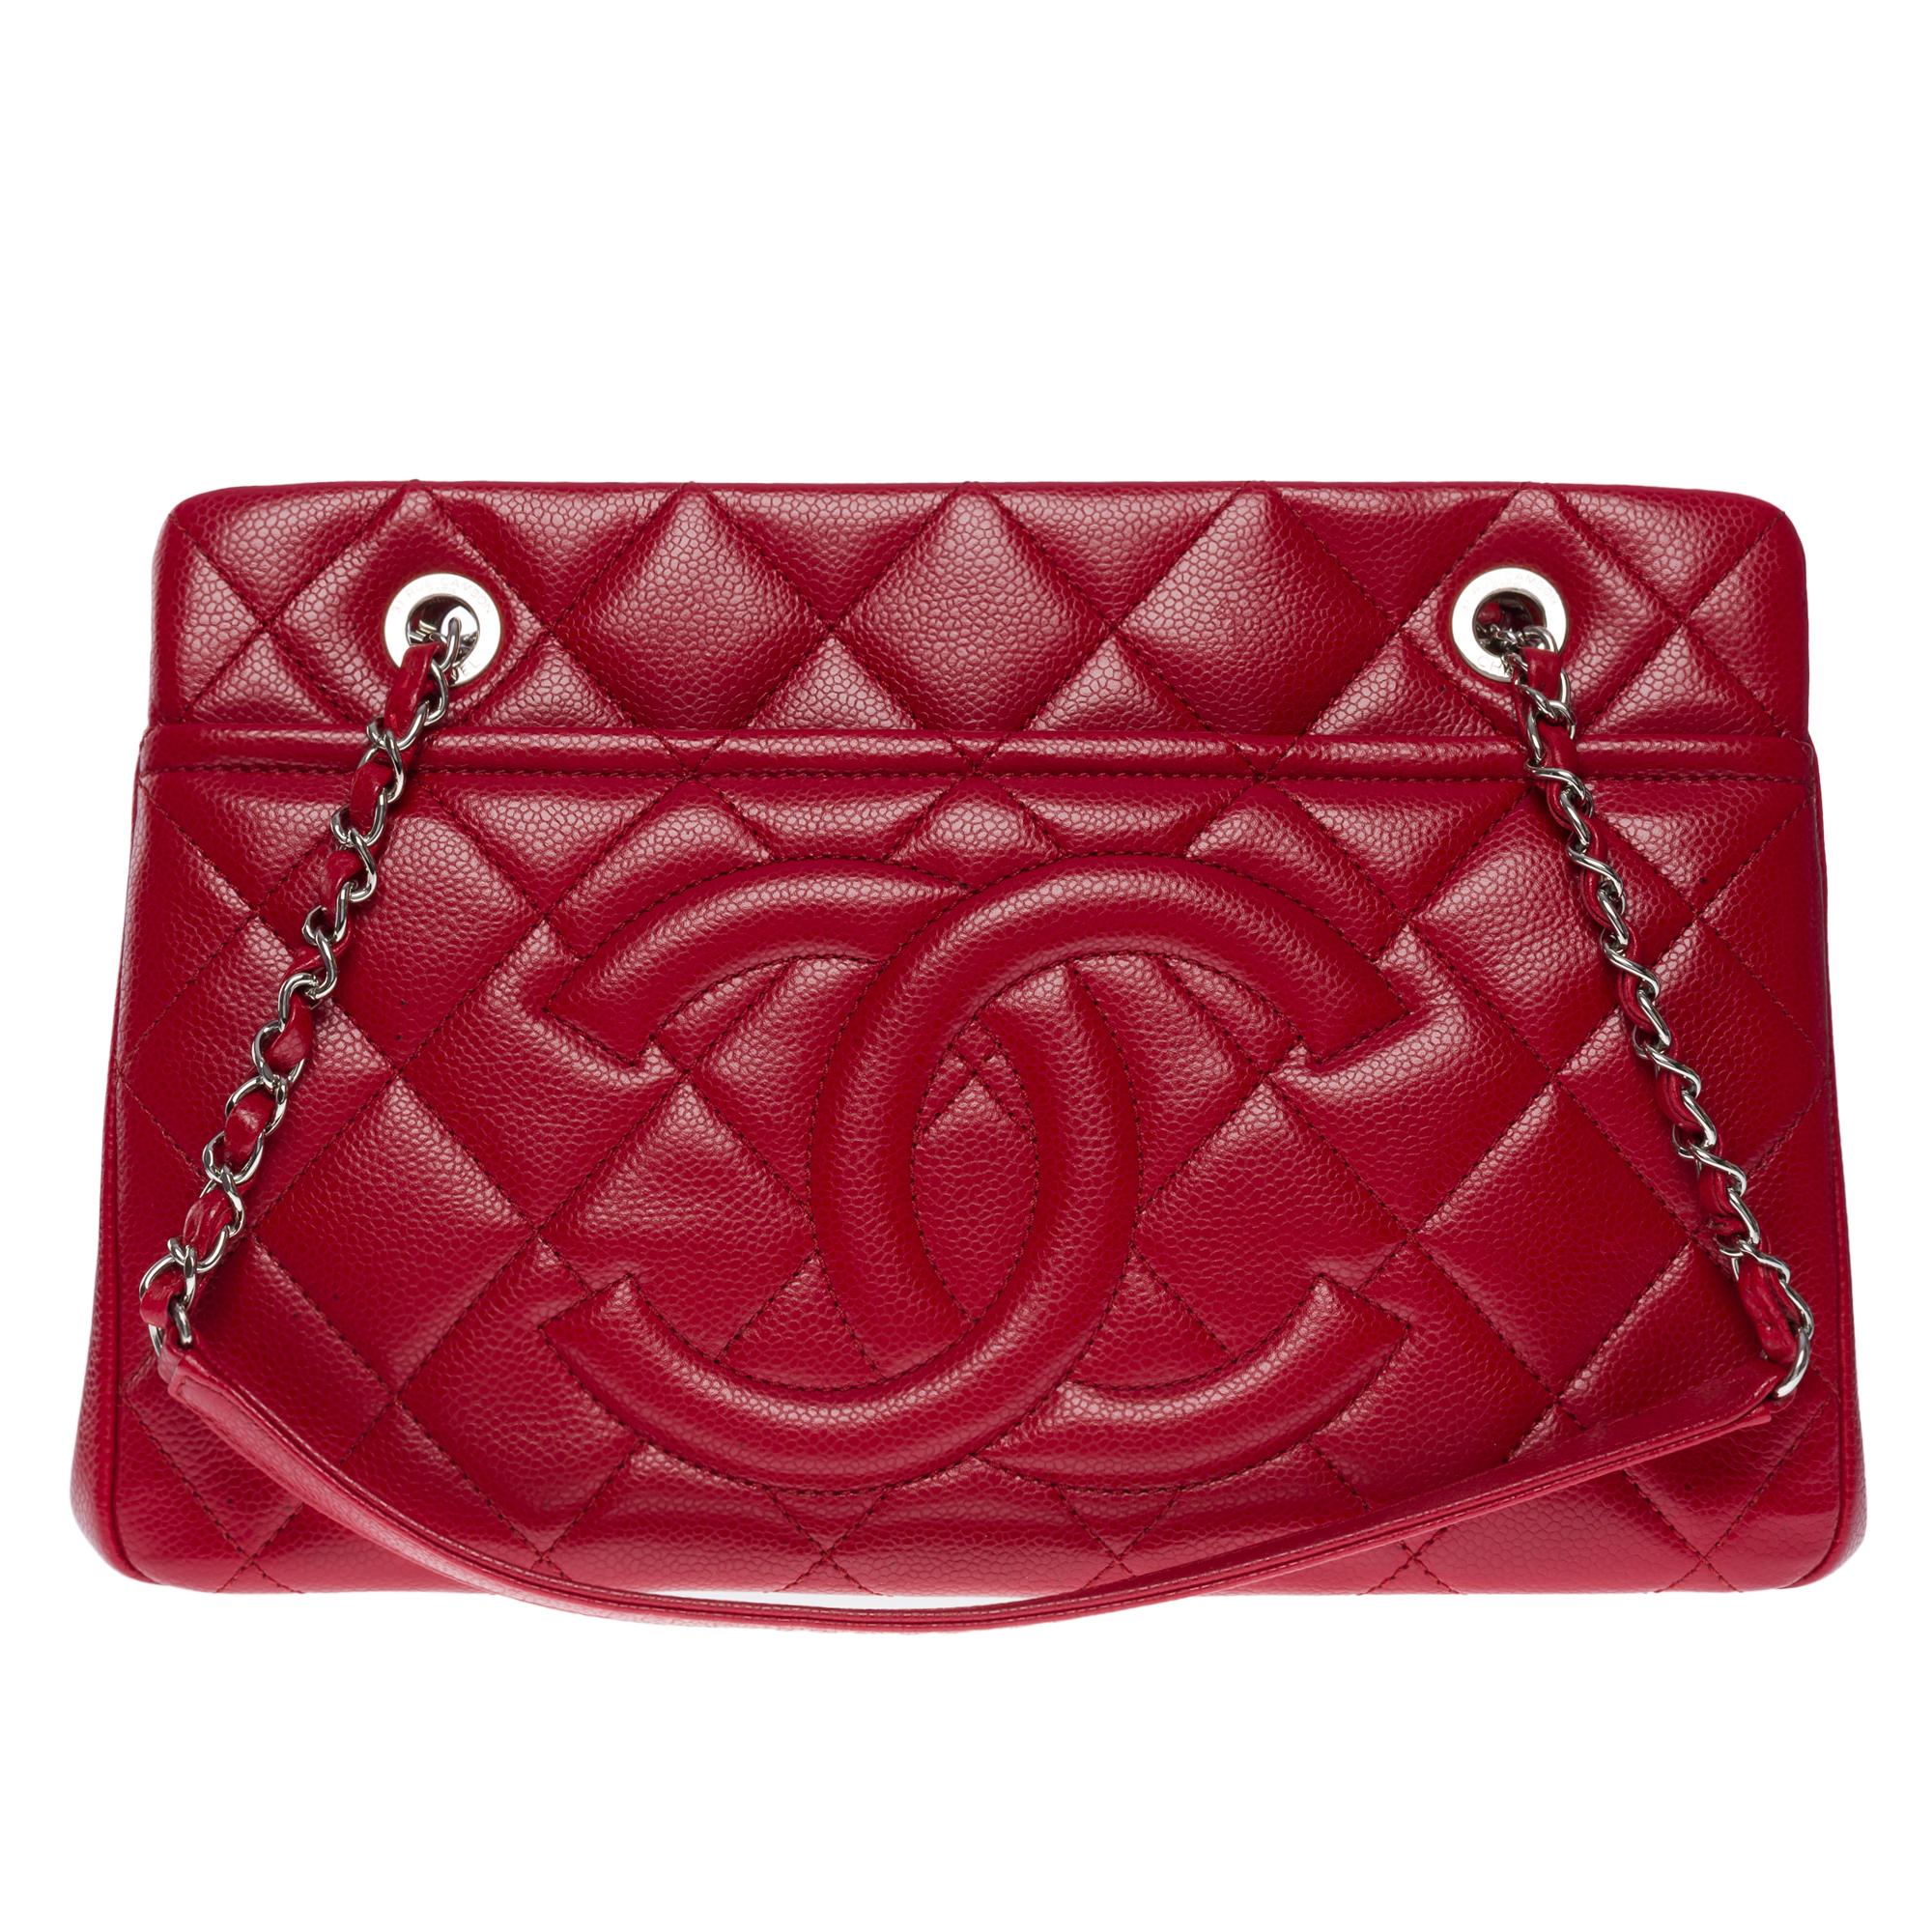 Beautiful Chanel Shopping Tote bag in red caviar quilted leather, silver metal hardware, a double chain-handle in silver metal interlaced with red leather allowing a shoulder support

1 patch pocket on back of bag
Zip closure on top, 2 patch